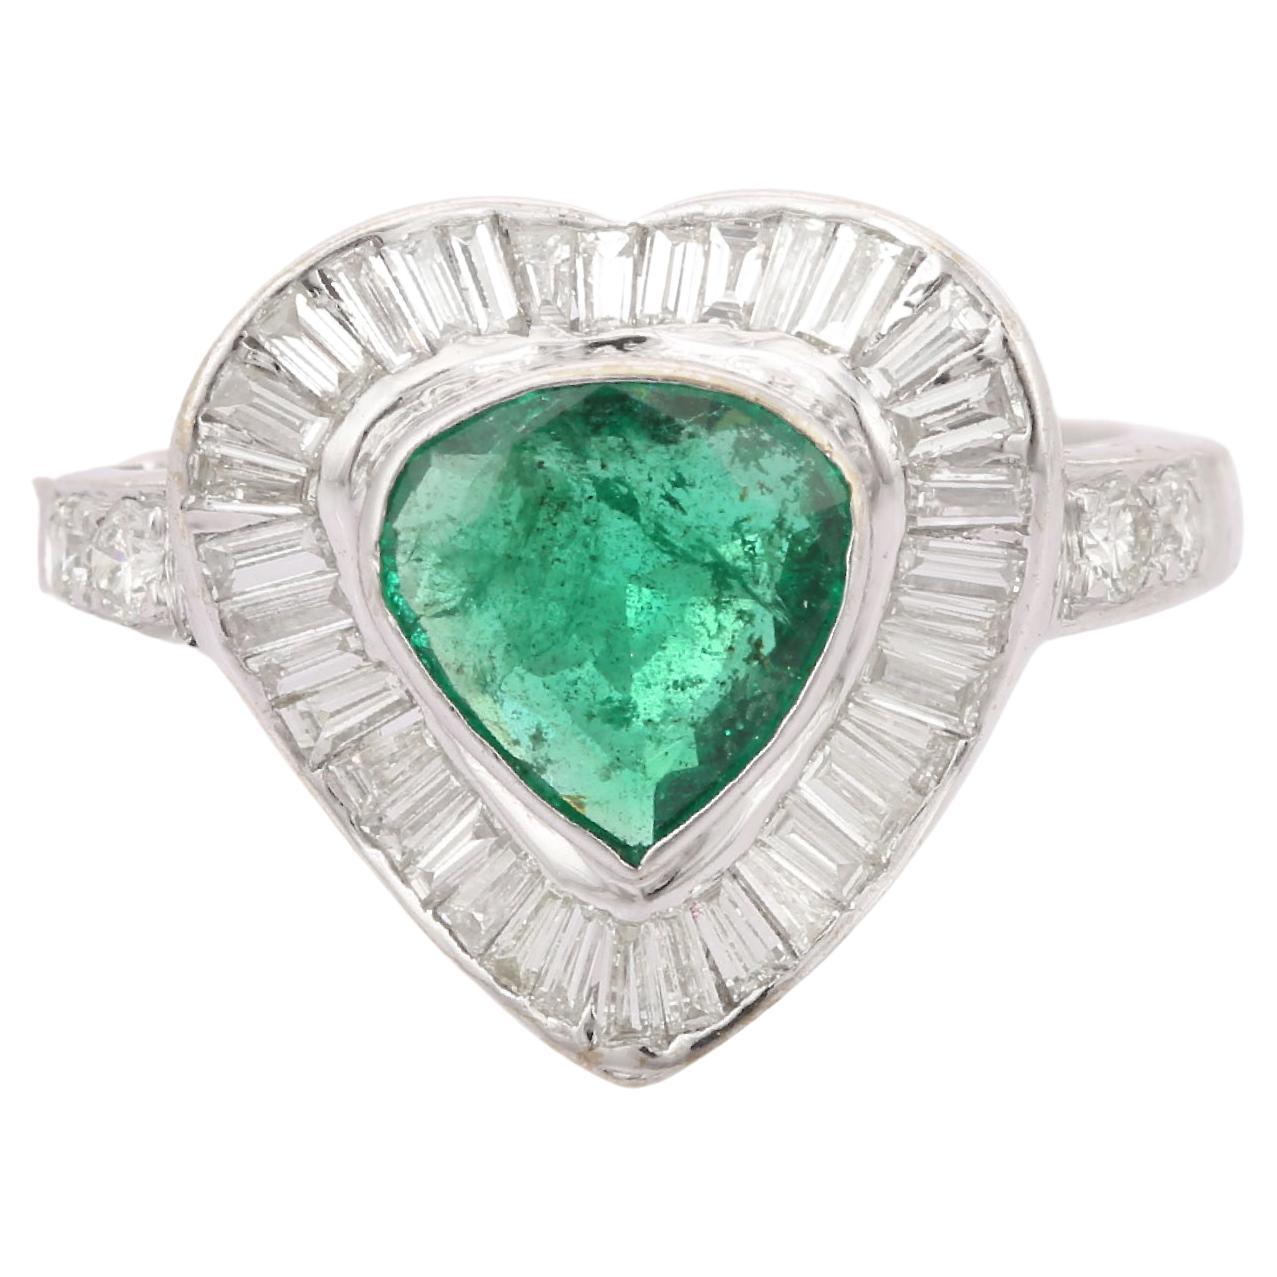 For Sale:  Emerald Diamond Heart Shape Wedding Ring in 18kt Solid White Gold